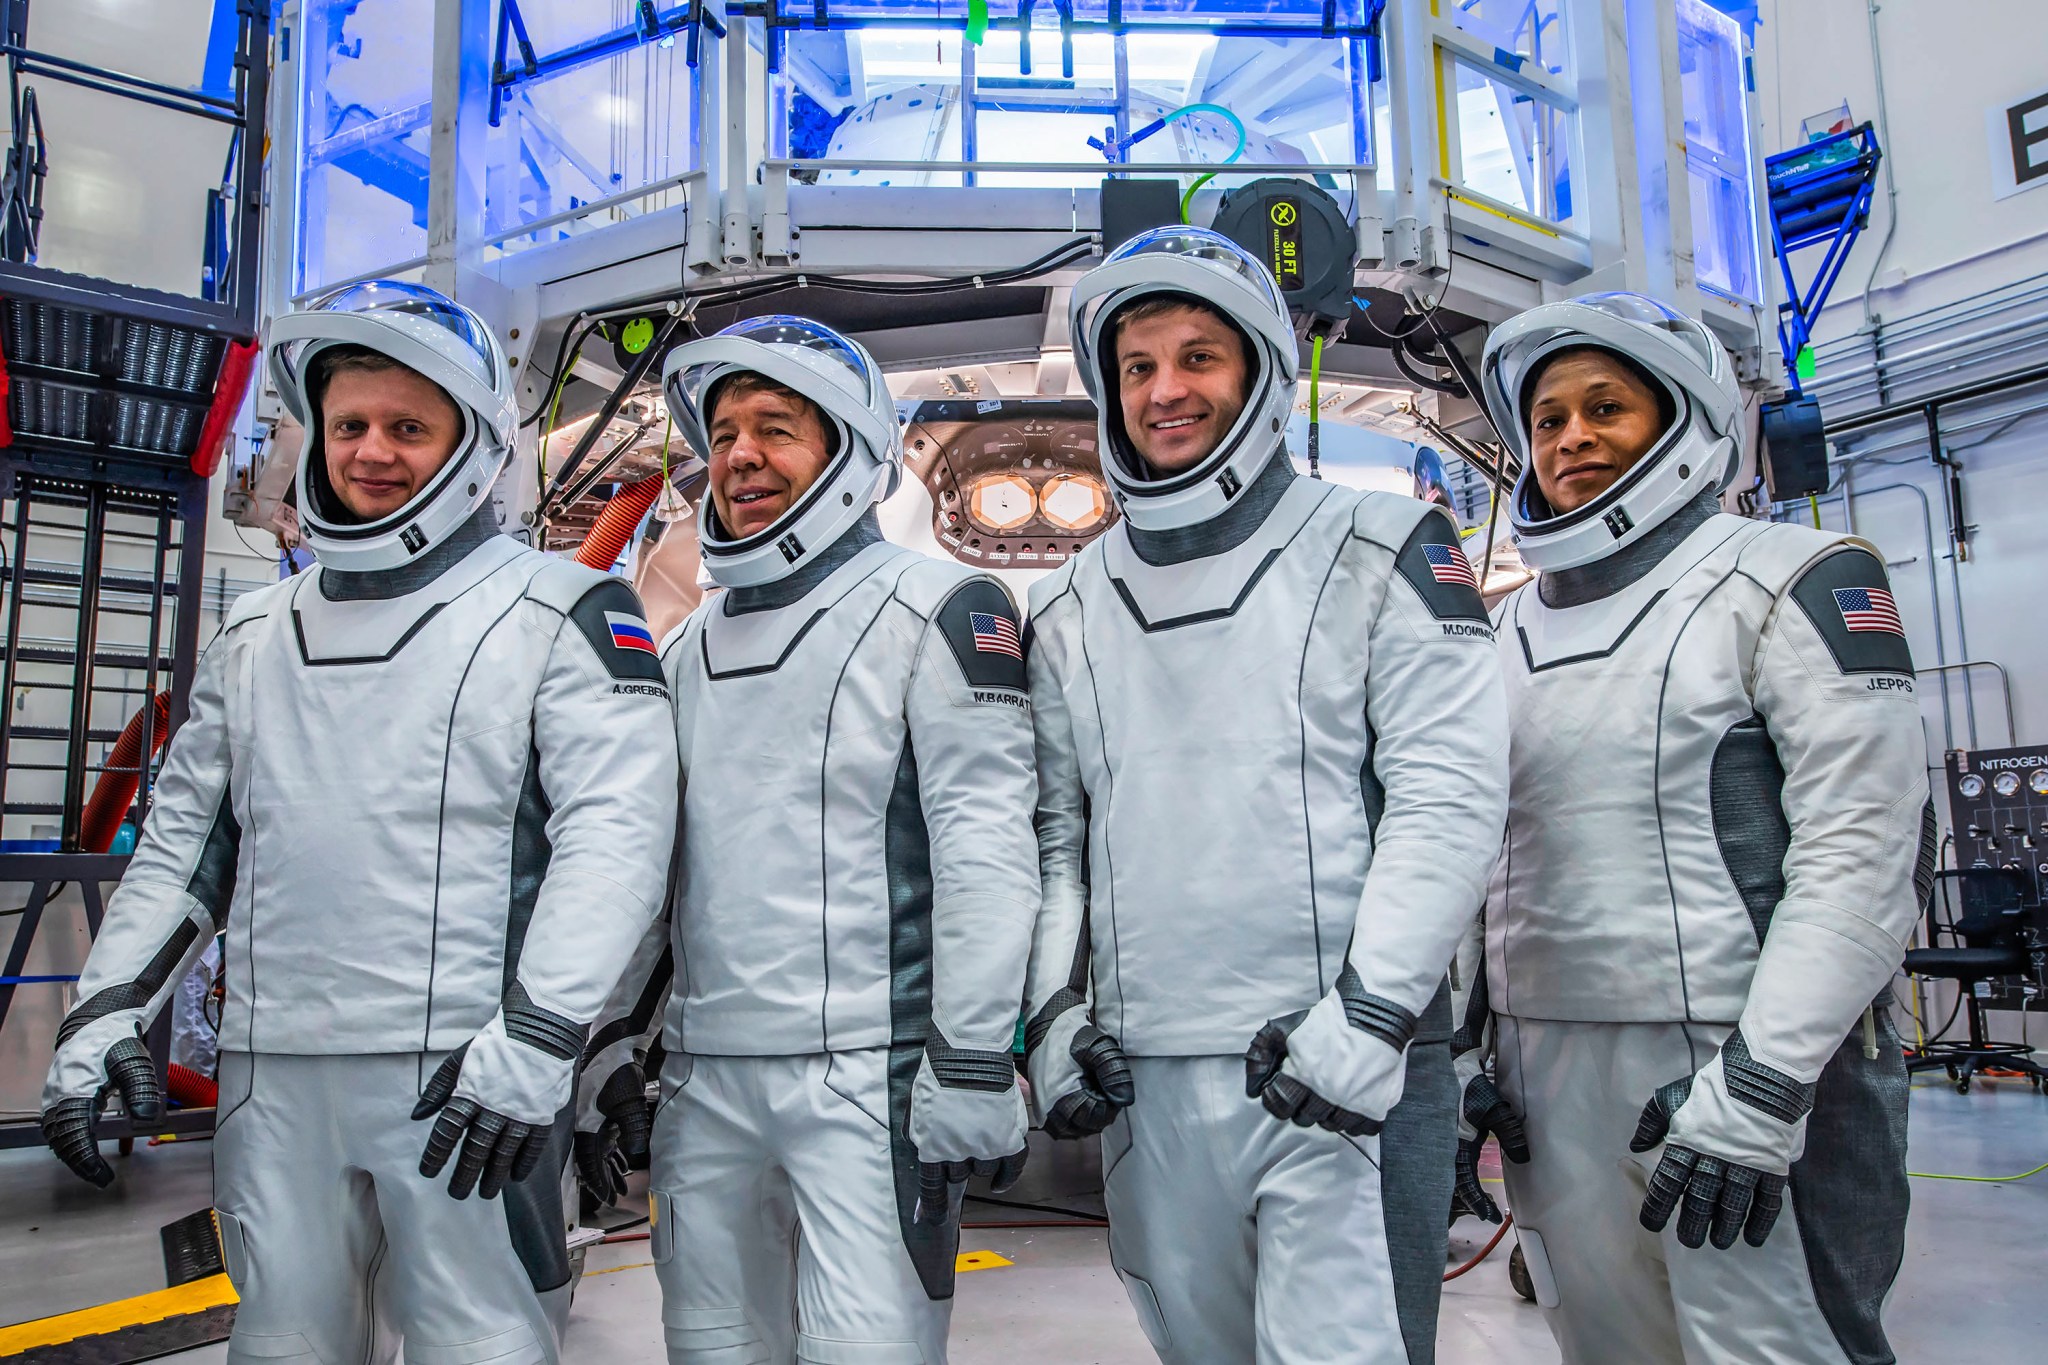 (Left to right) Roscosmos Cosmonaut Alexander Grebenkin and NASA Astronauts Michael Barratt, Matthew Dominick, and Jeanette Epps pose for a photo during their Crew Equipment Interface Test at NASA’sa Kennedy Space Center in Florida. The goal of the training is to rehearse launch day activities and get a close look at the spacecraft that will take them to the International Space Station.